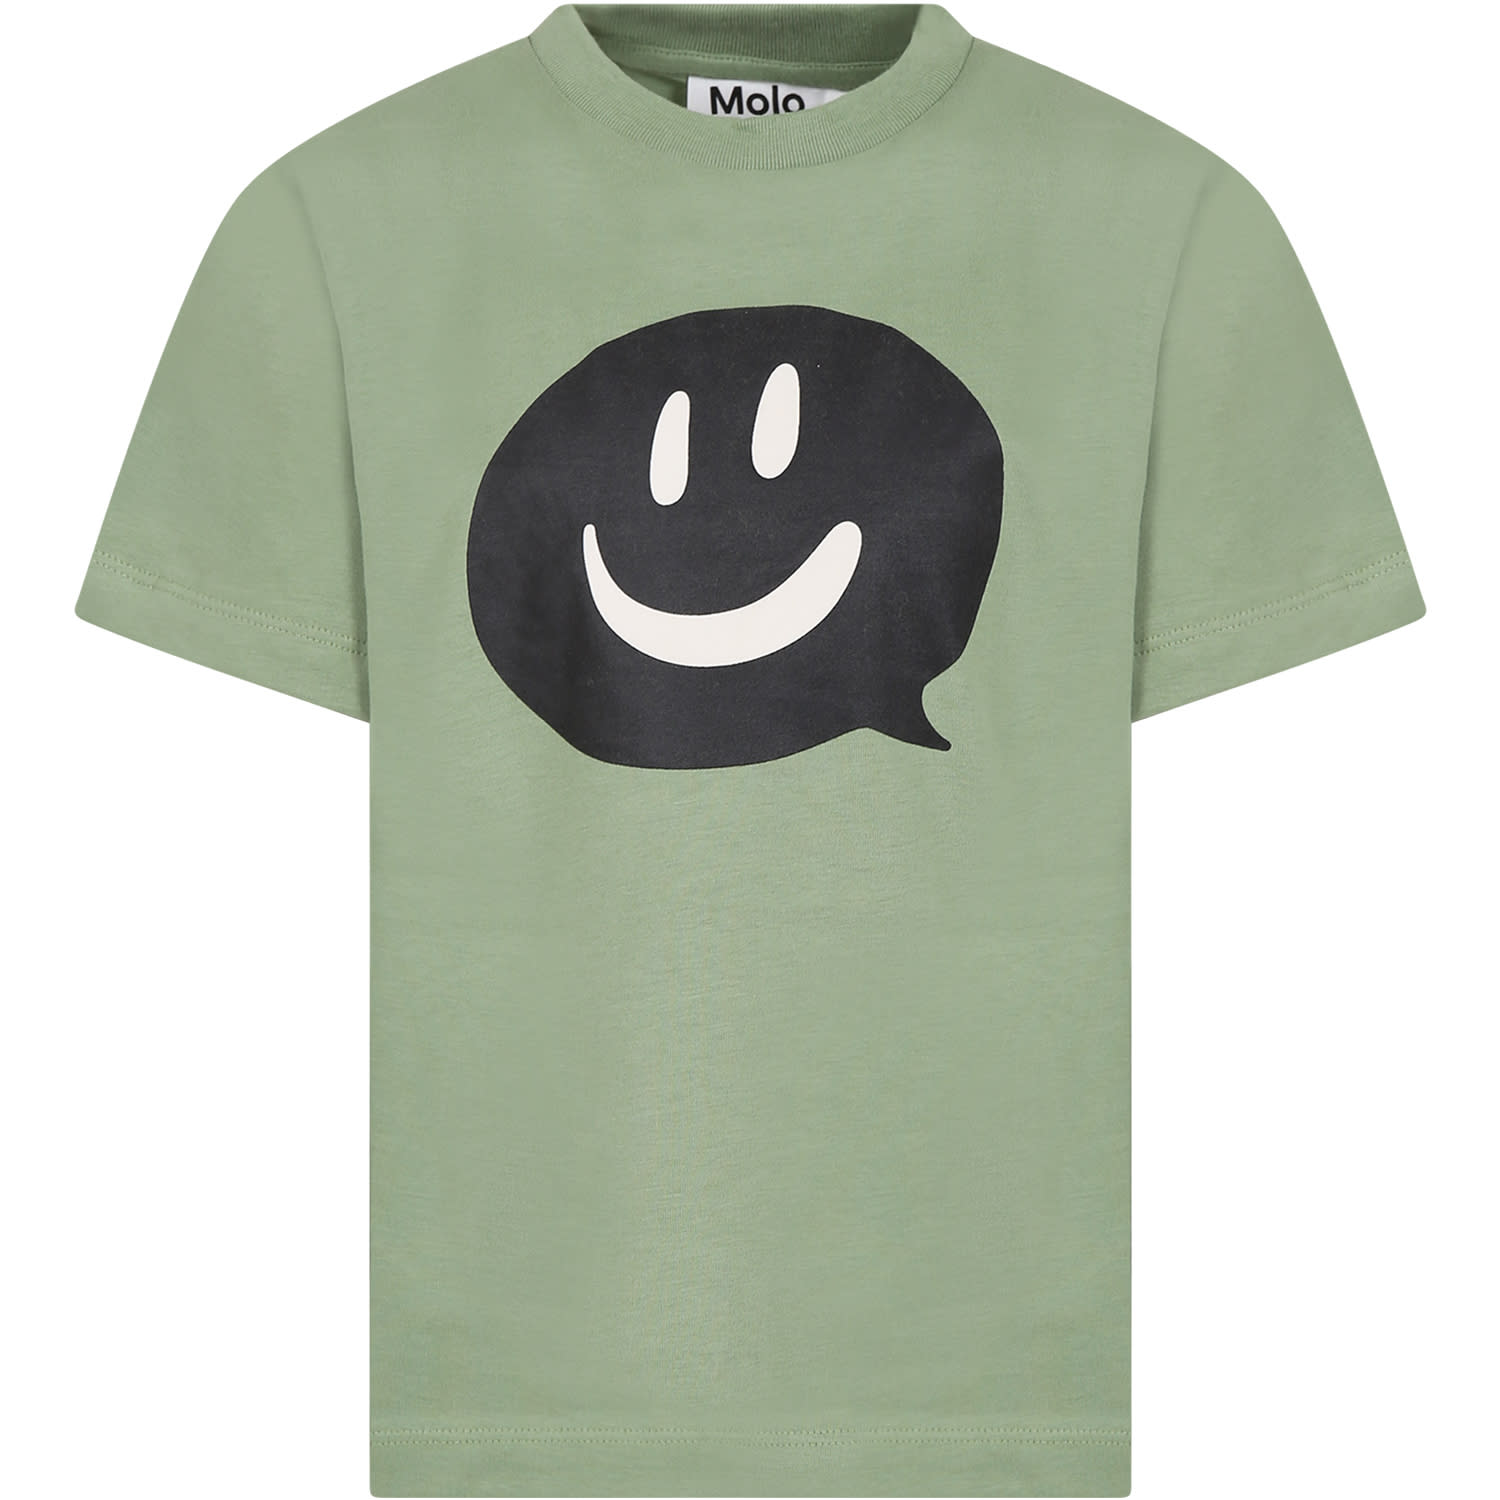 Molo Green T-shirt For Kids With Smiley